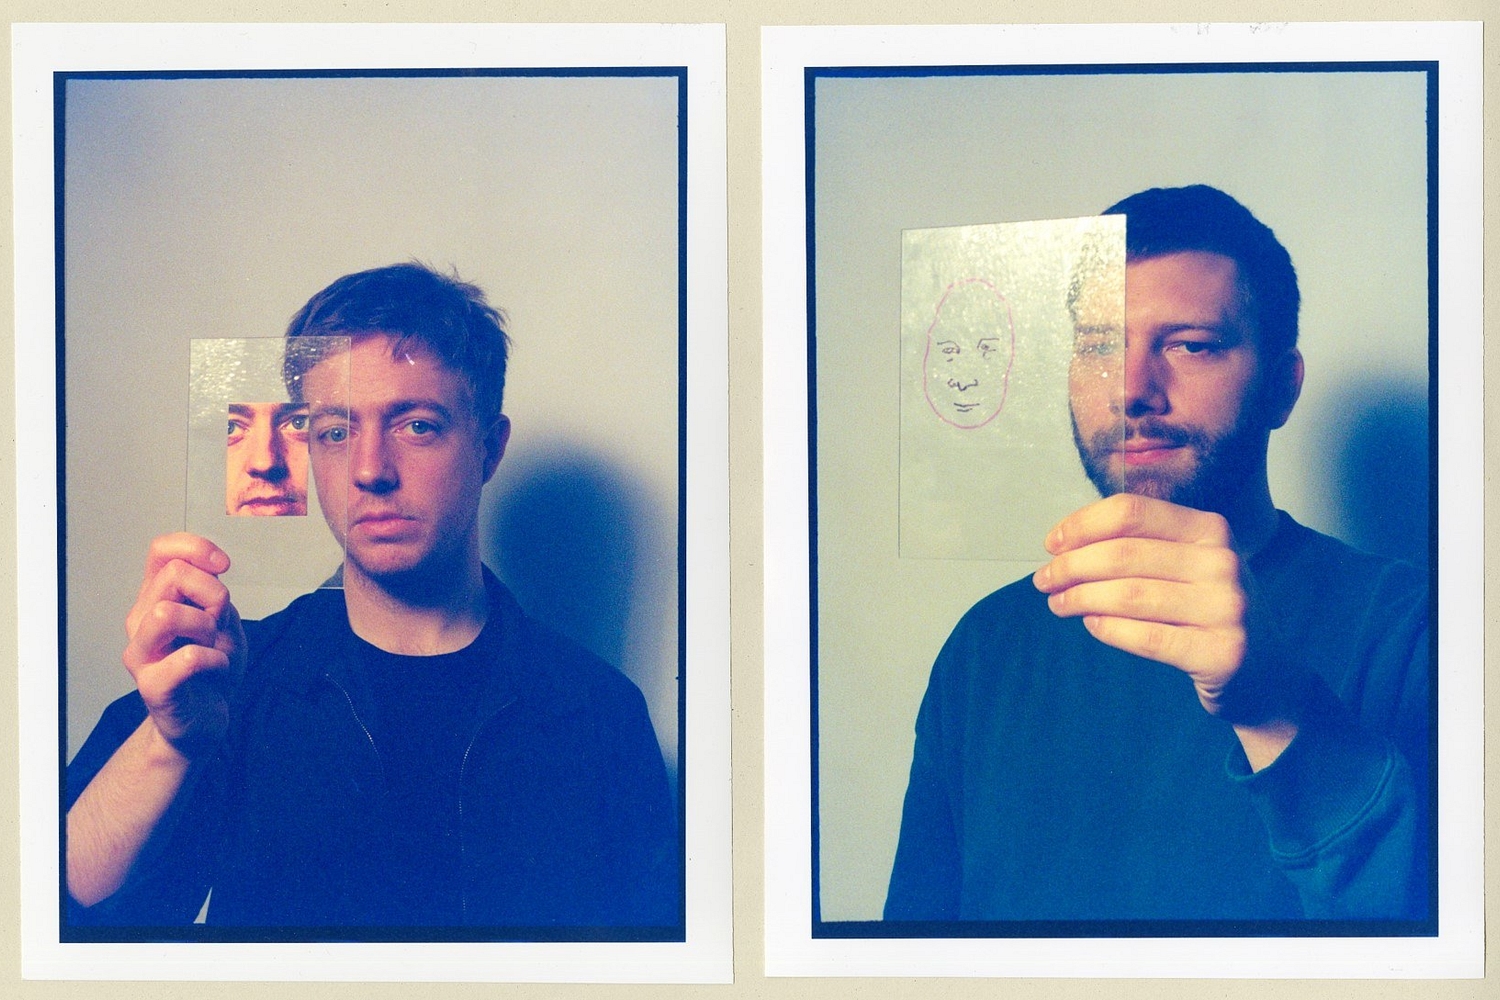 Mount Kimbie have announced new album ‘Love What Survives’